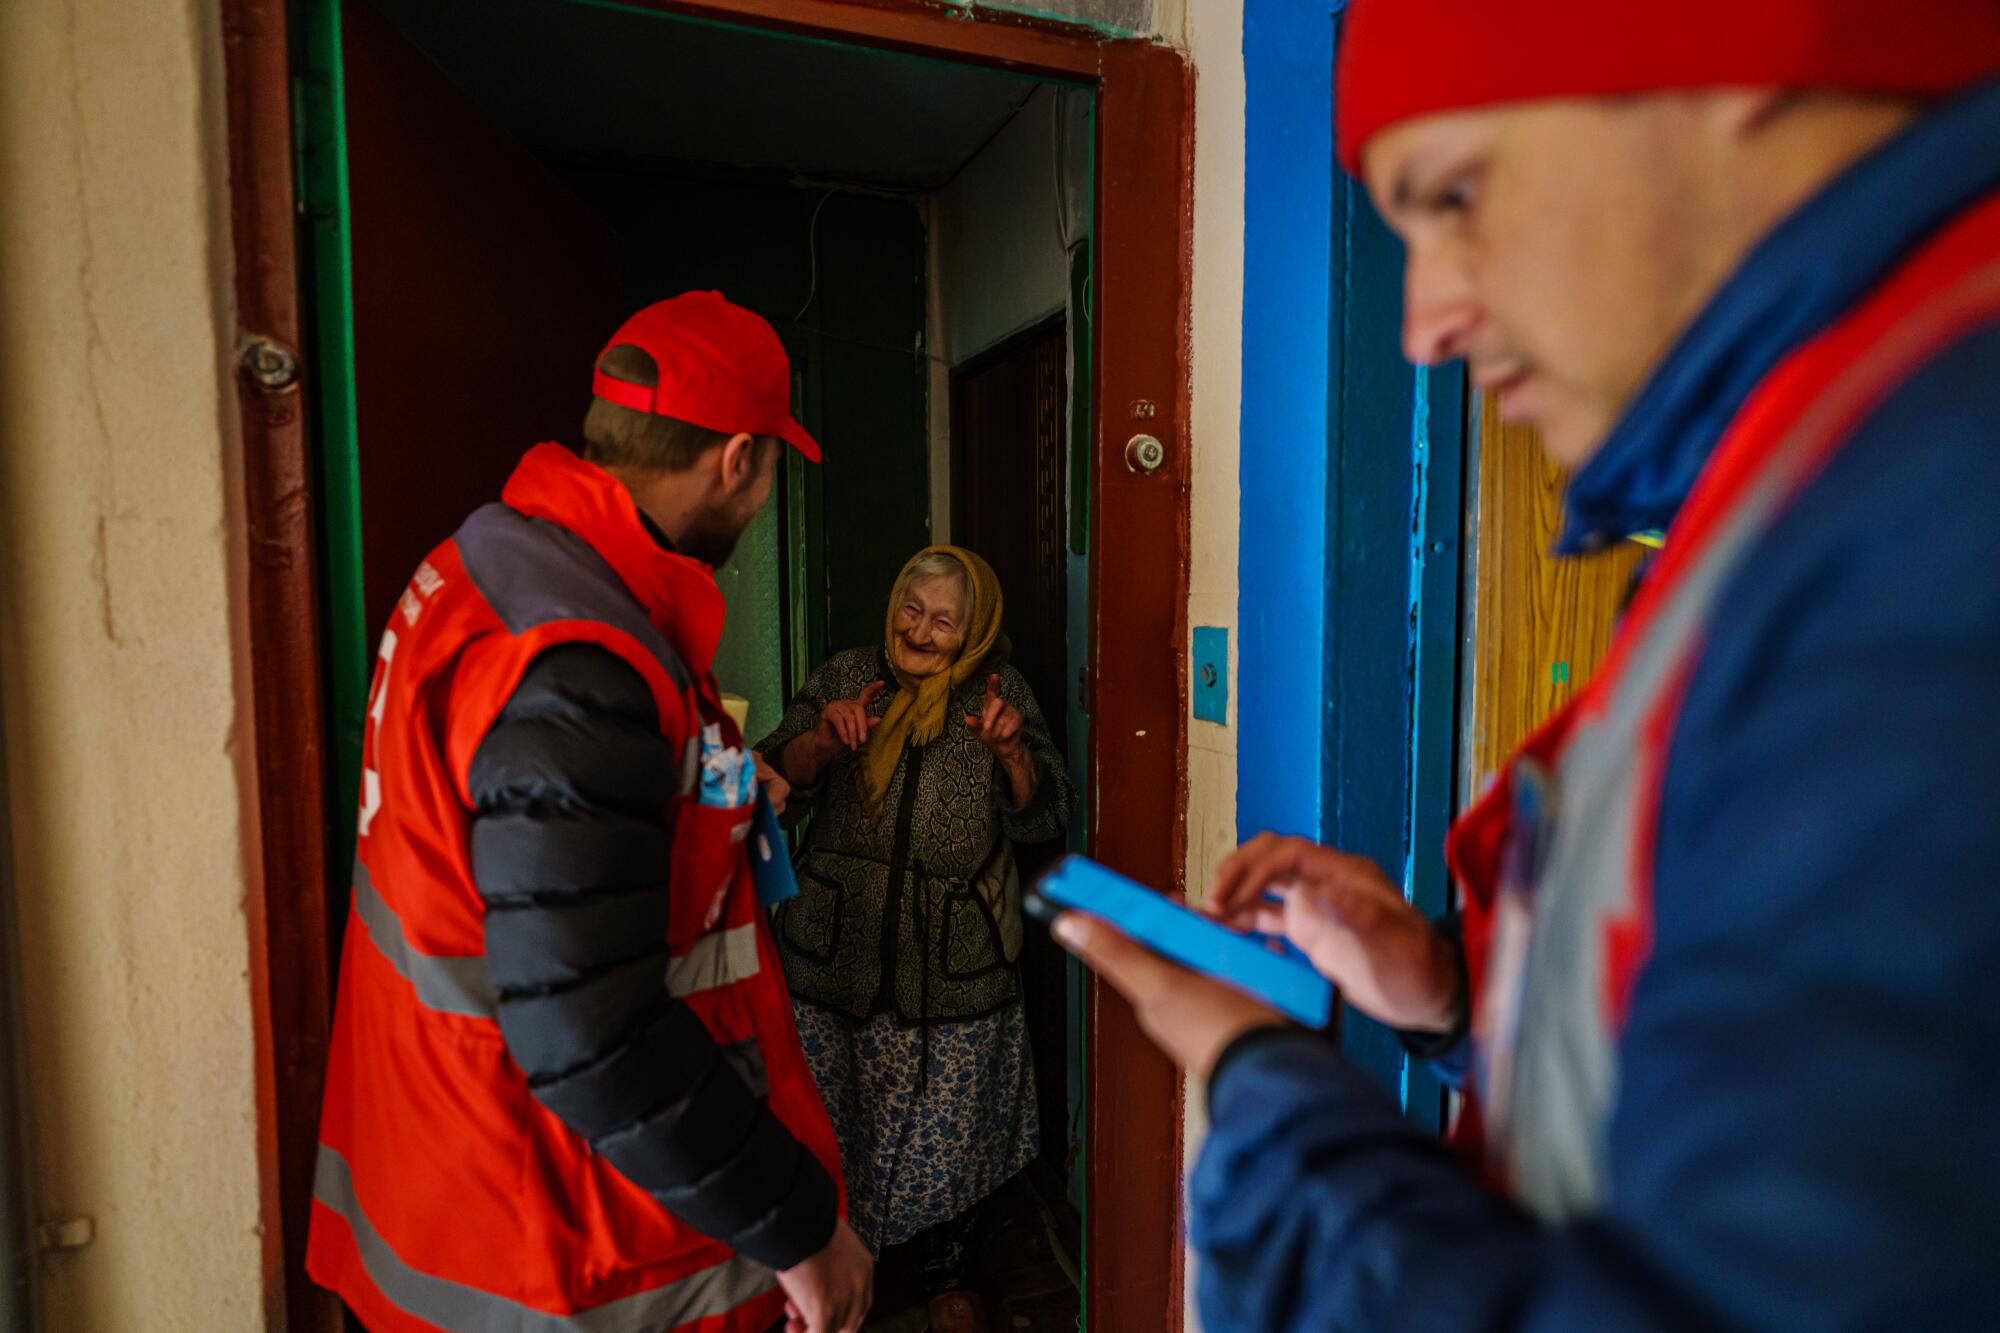 Two male Red Cross workers deliver aid to an elderly female resident in the doorway of her home.